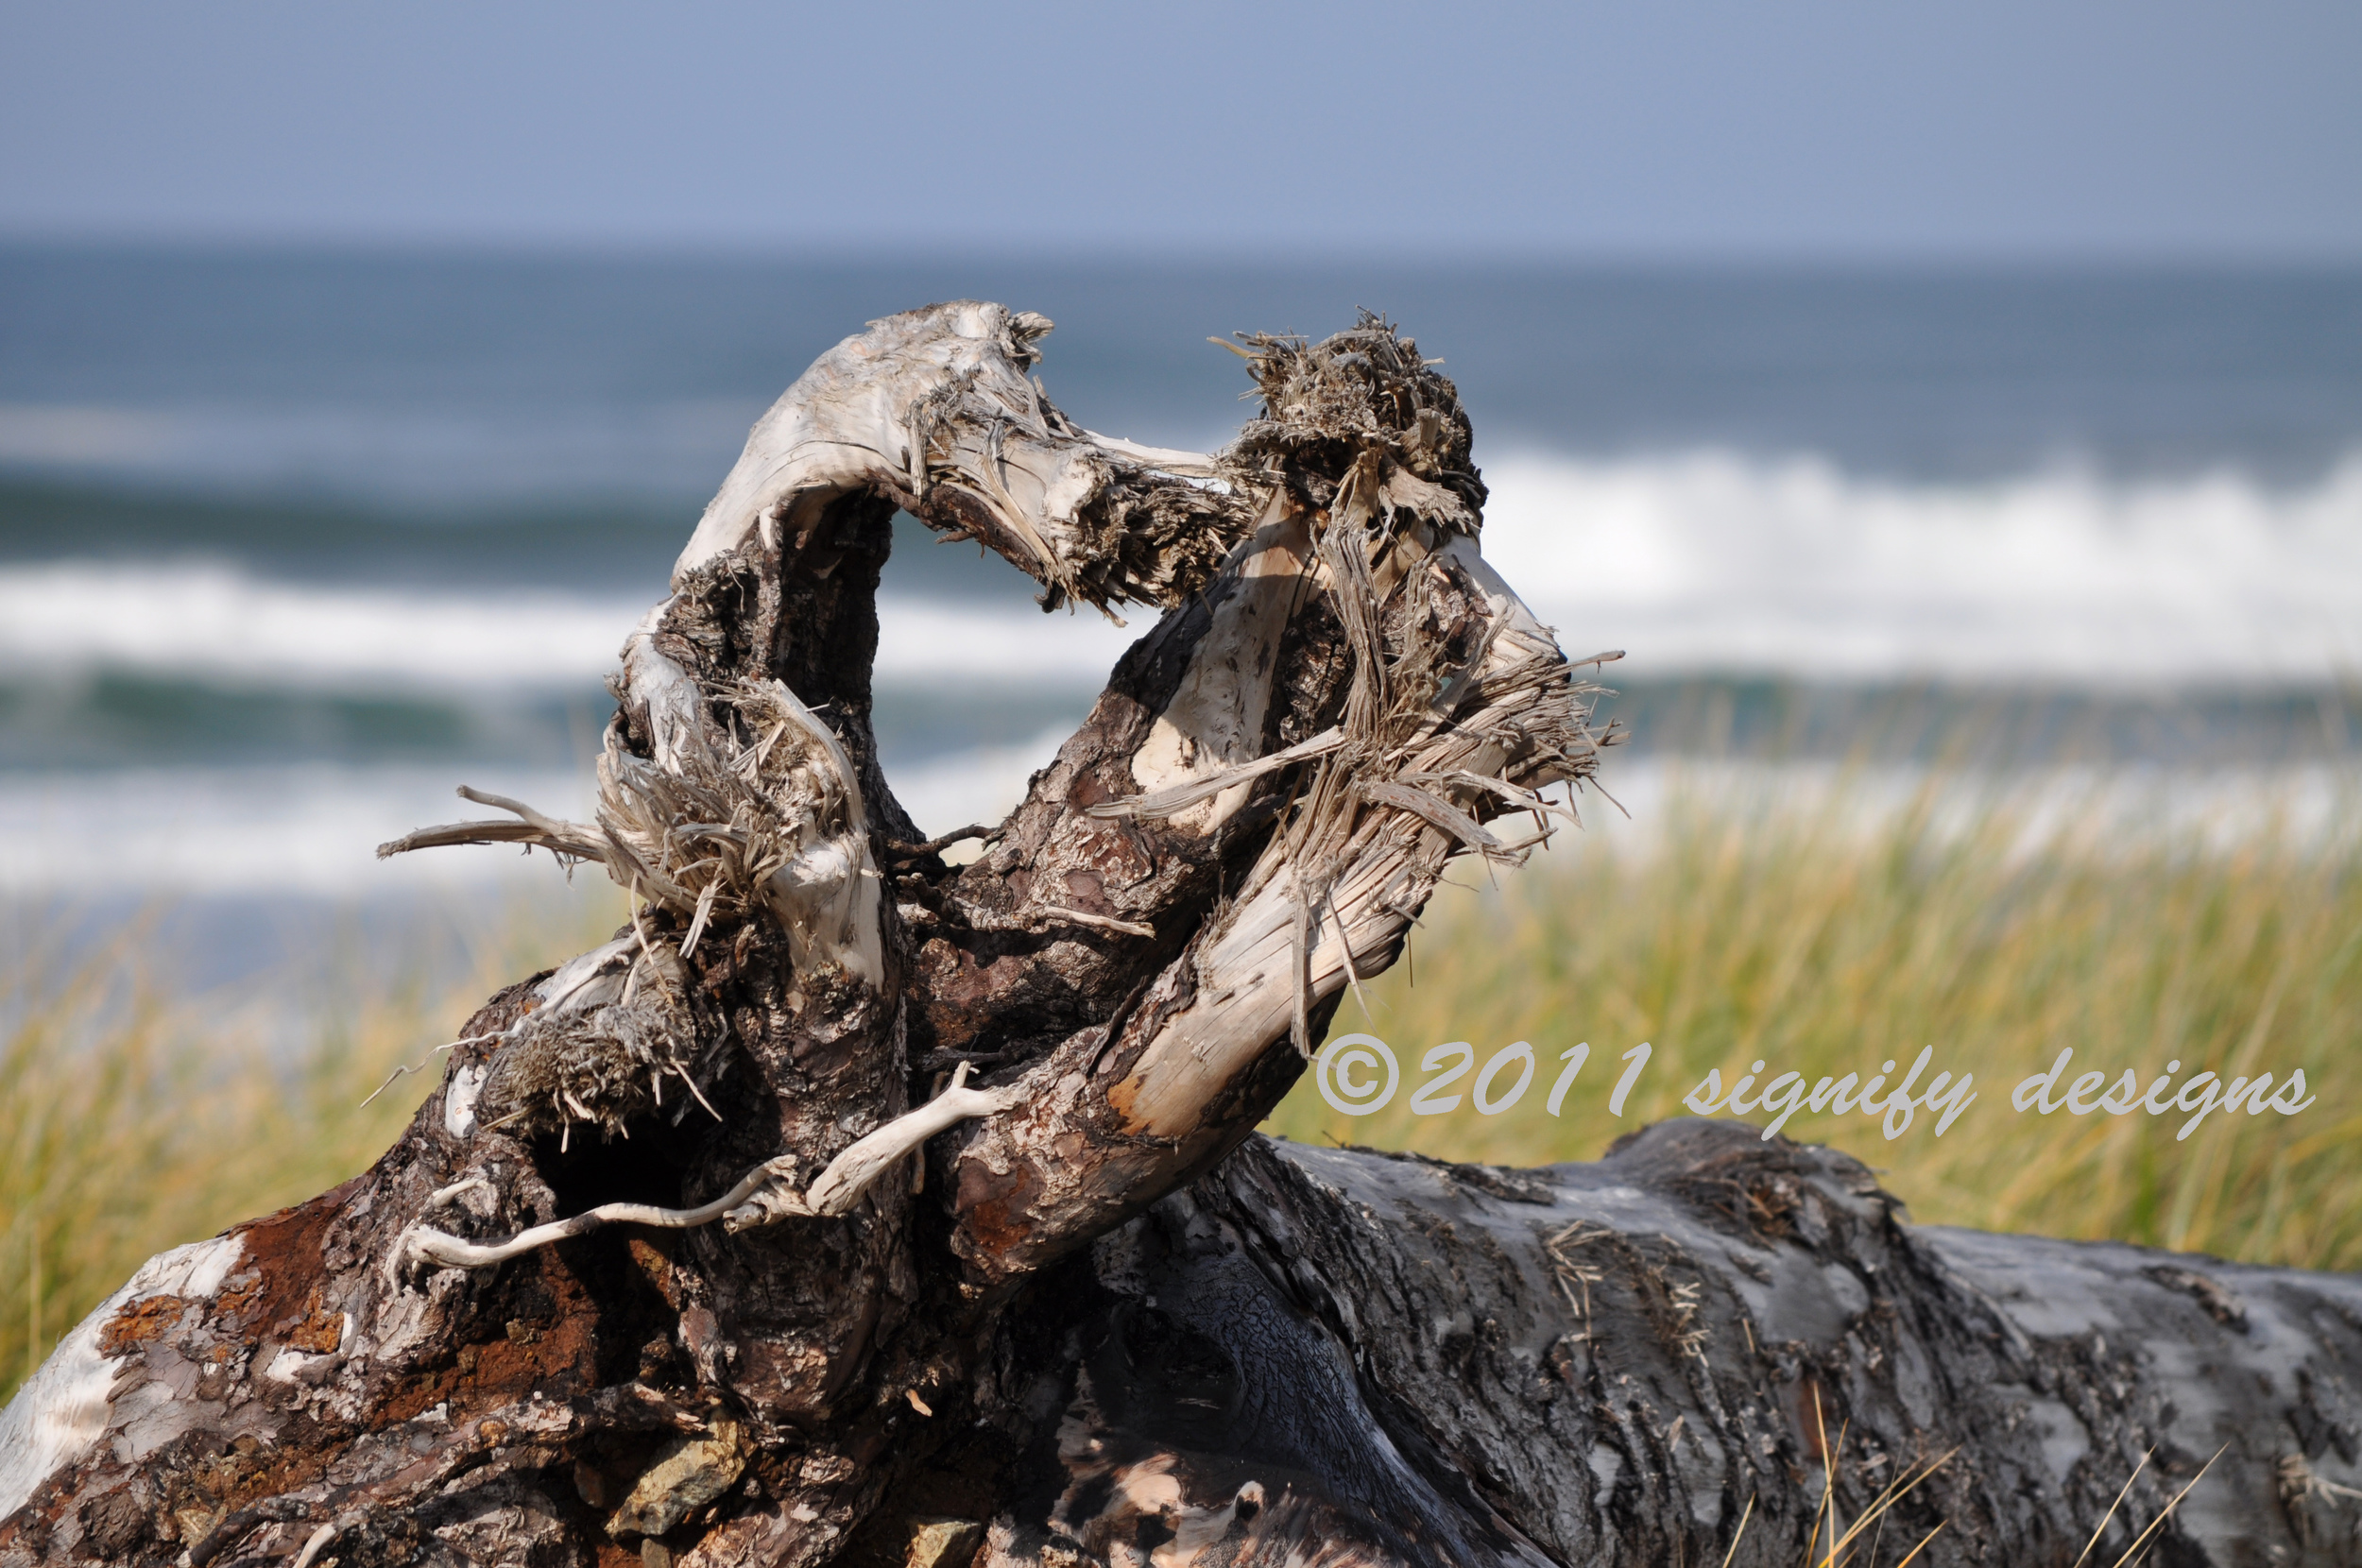     
 800x600 
    I happened upon this fallen tree at the Oregon Coast, whose upturned roots were in the shape of a heart. It was so remarkable to me that God would put reminders of his love even in the roots of trees! His promises are over all crea